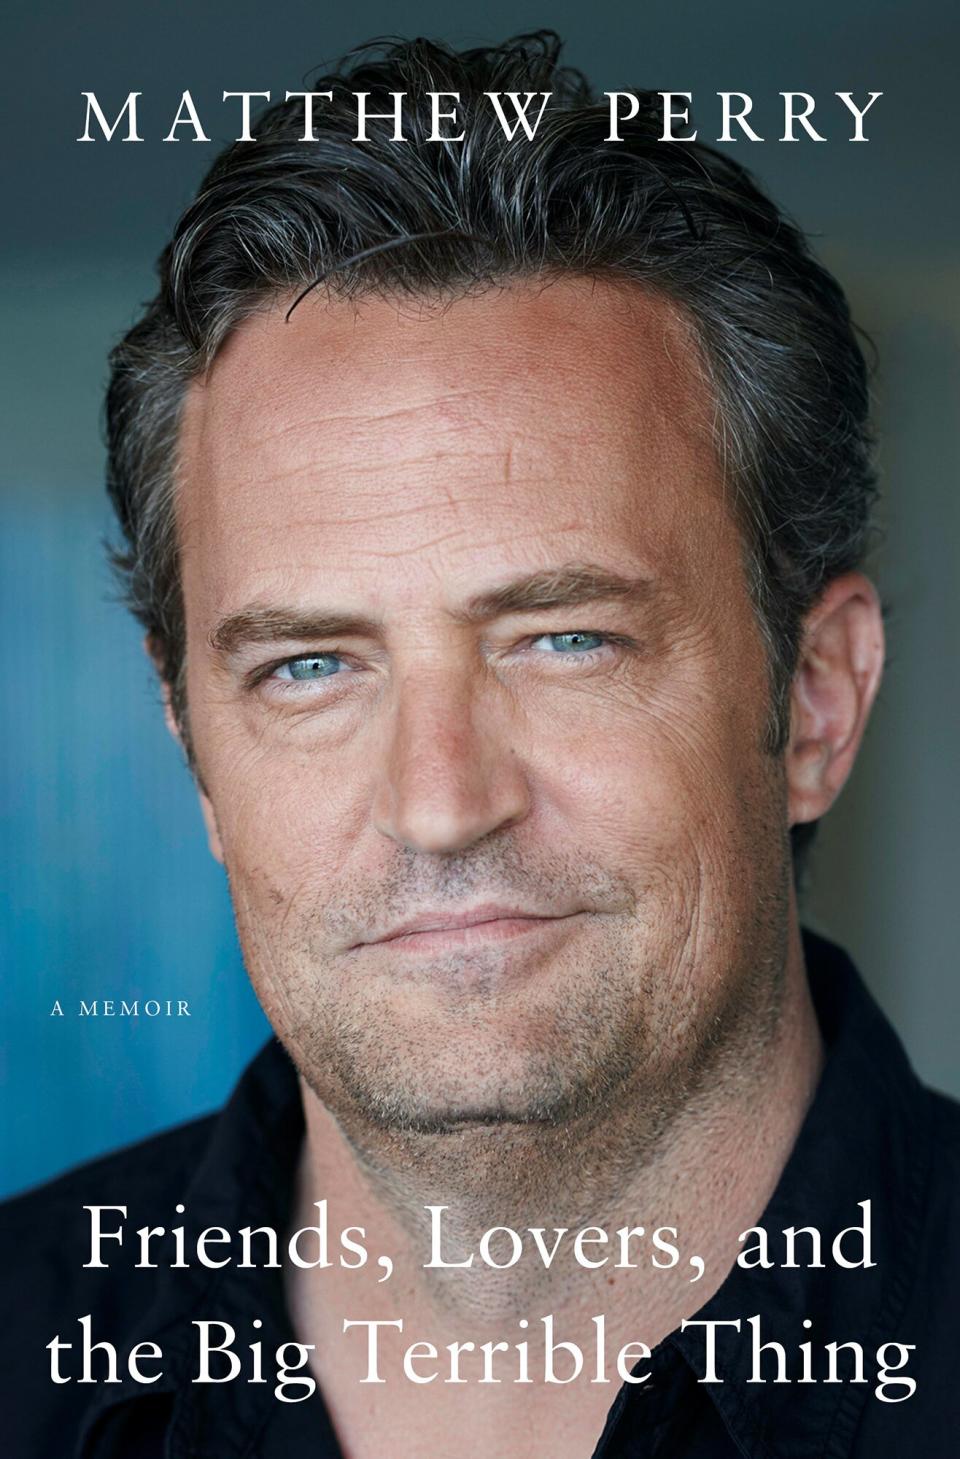 Matthew Perry book cover